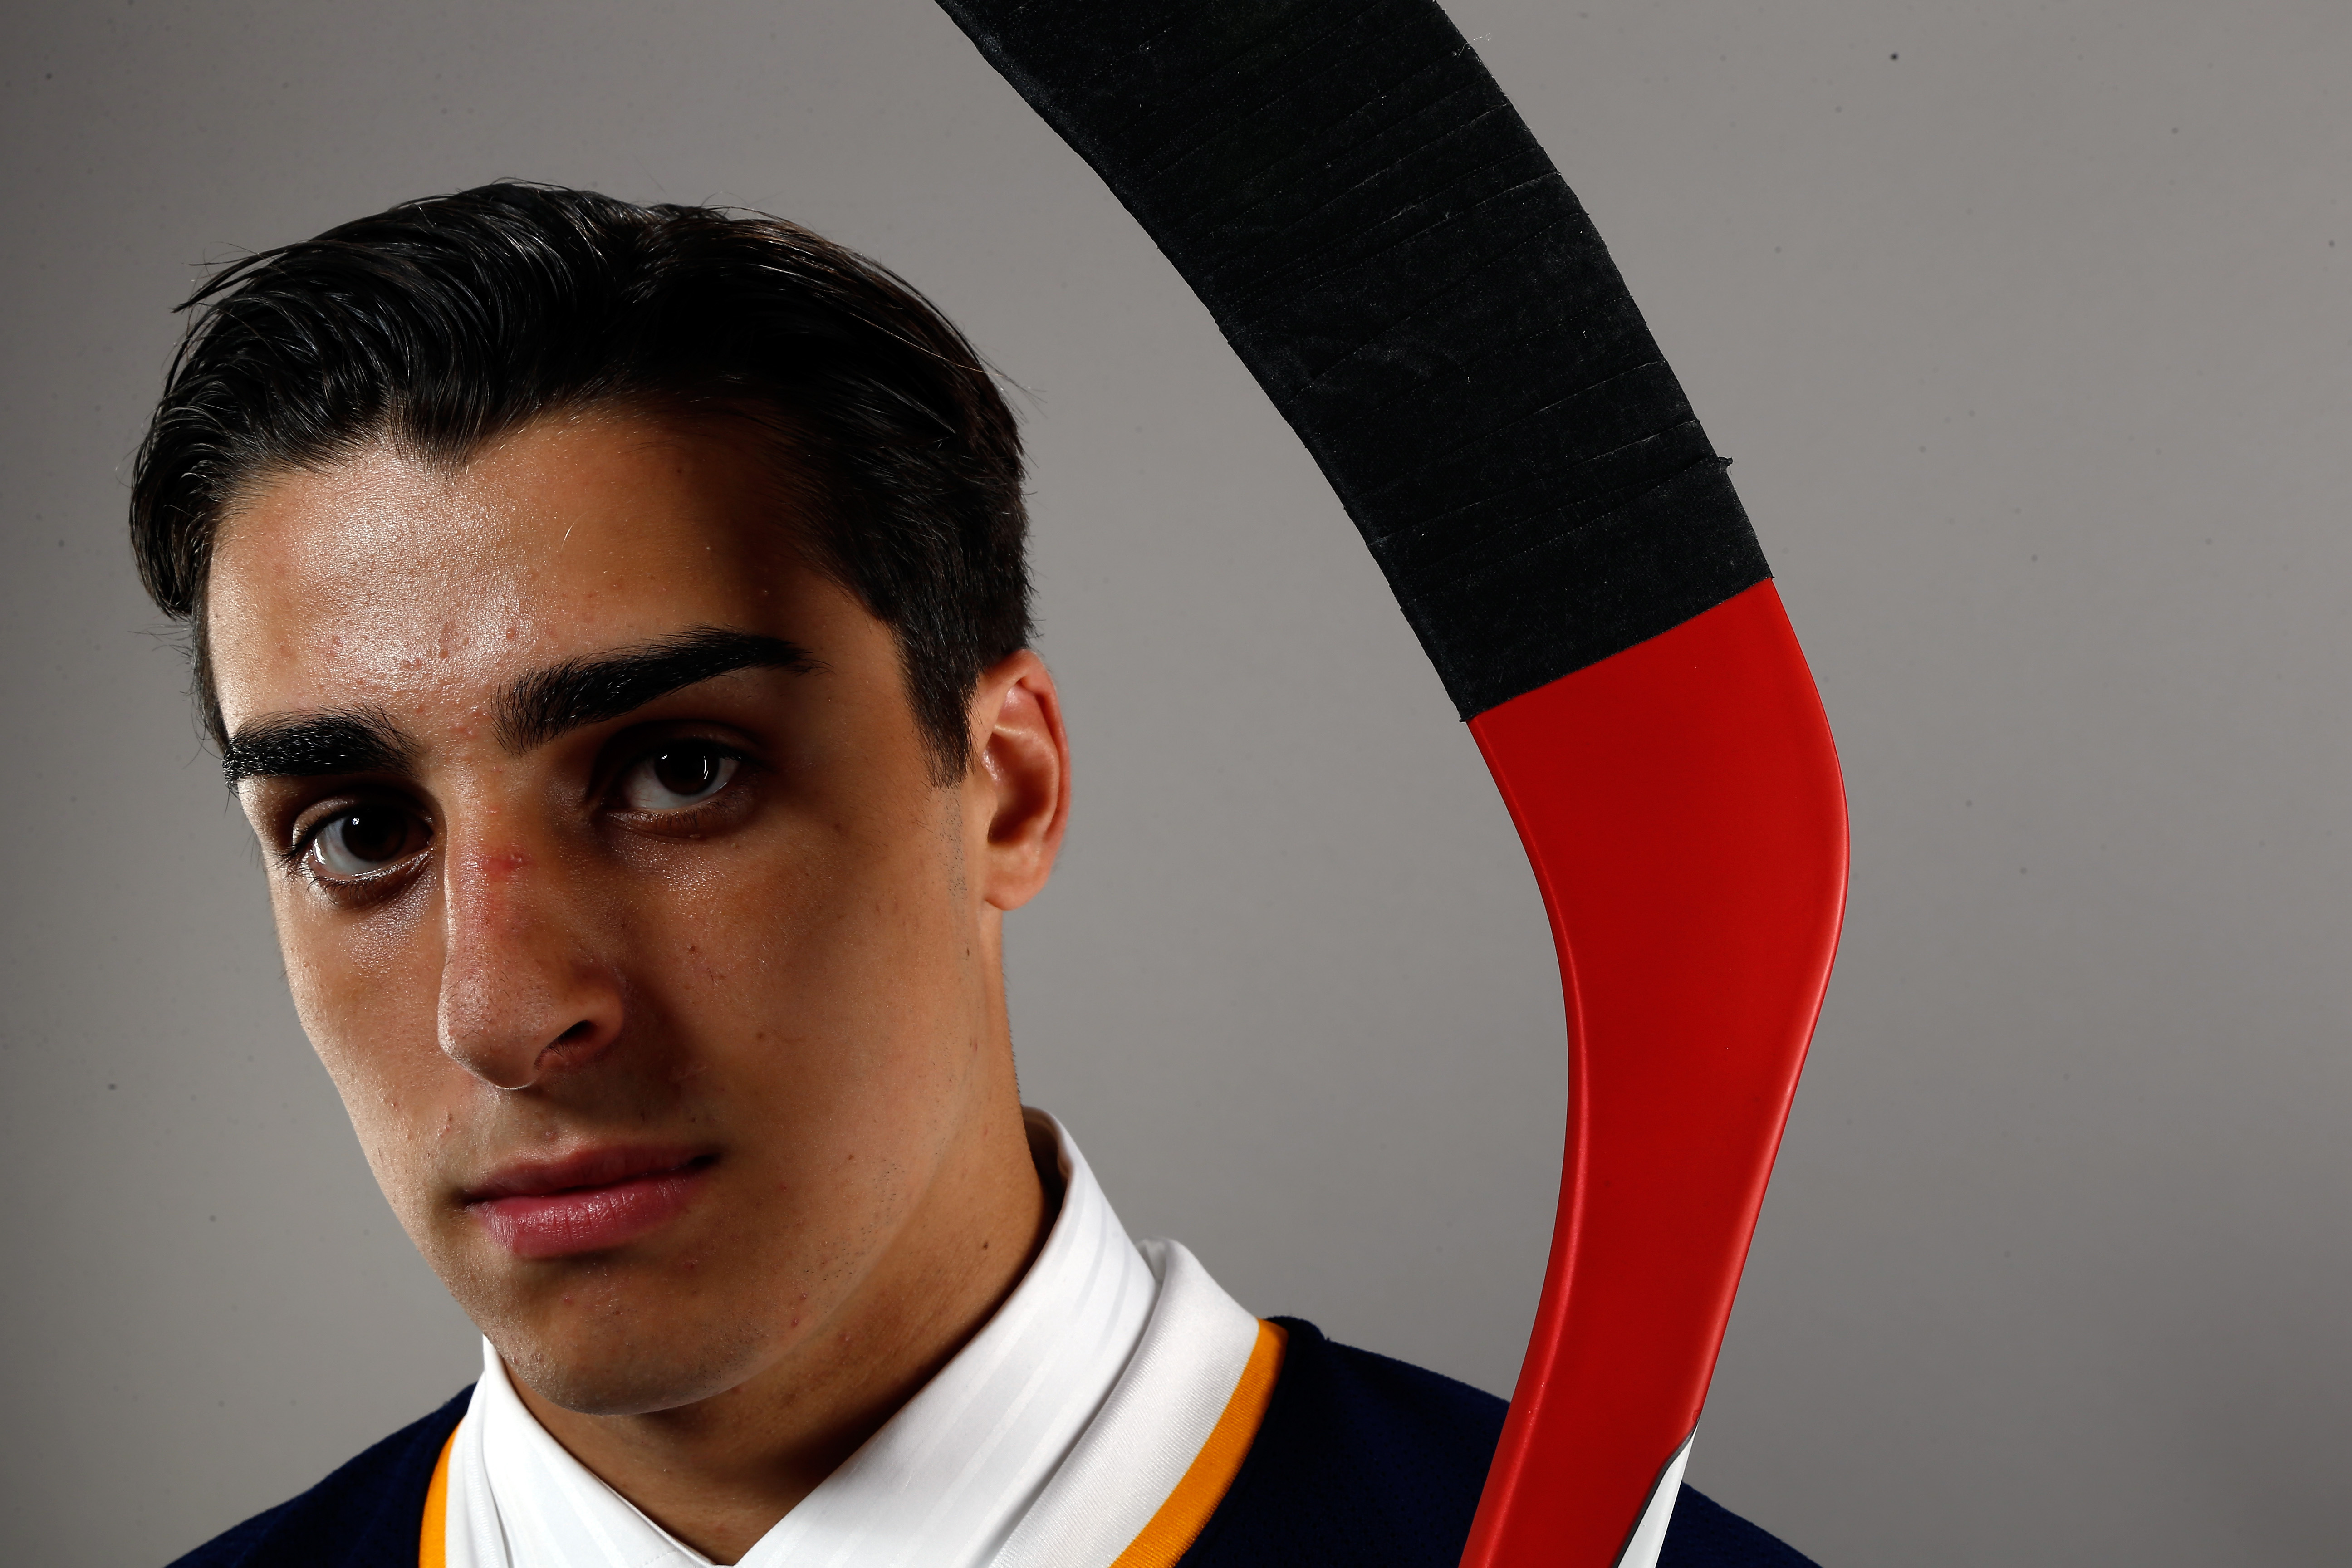 The Devils have been defeated at home, and it's all Robby Fabbri's fault